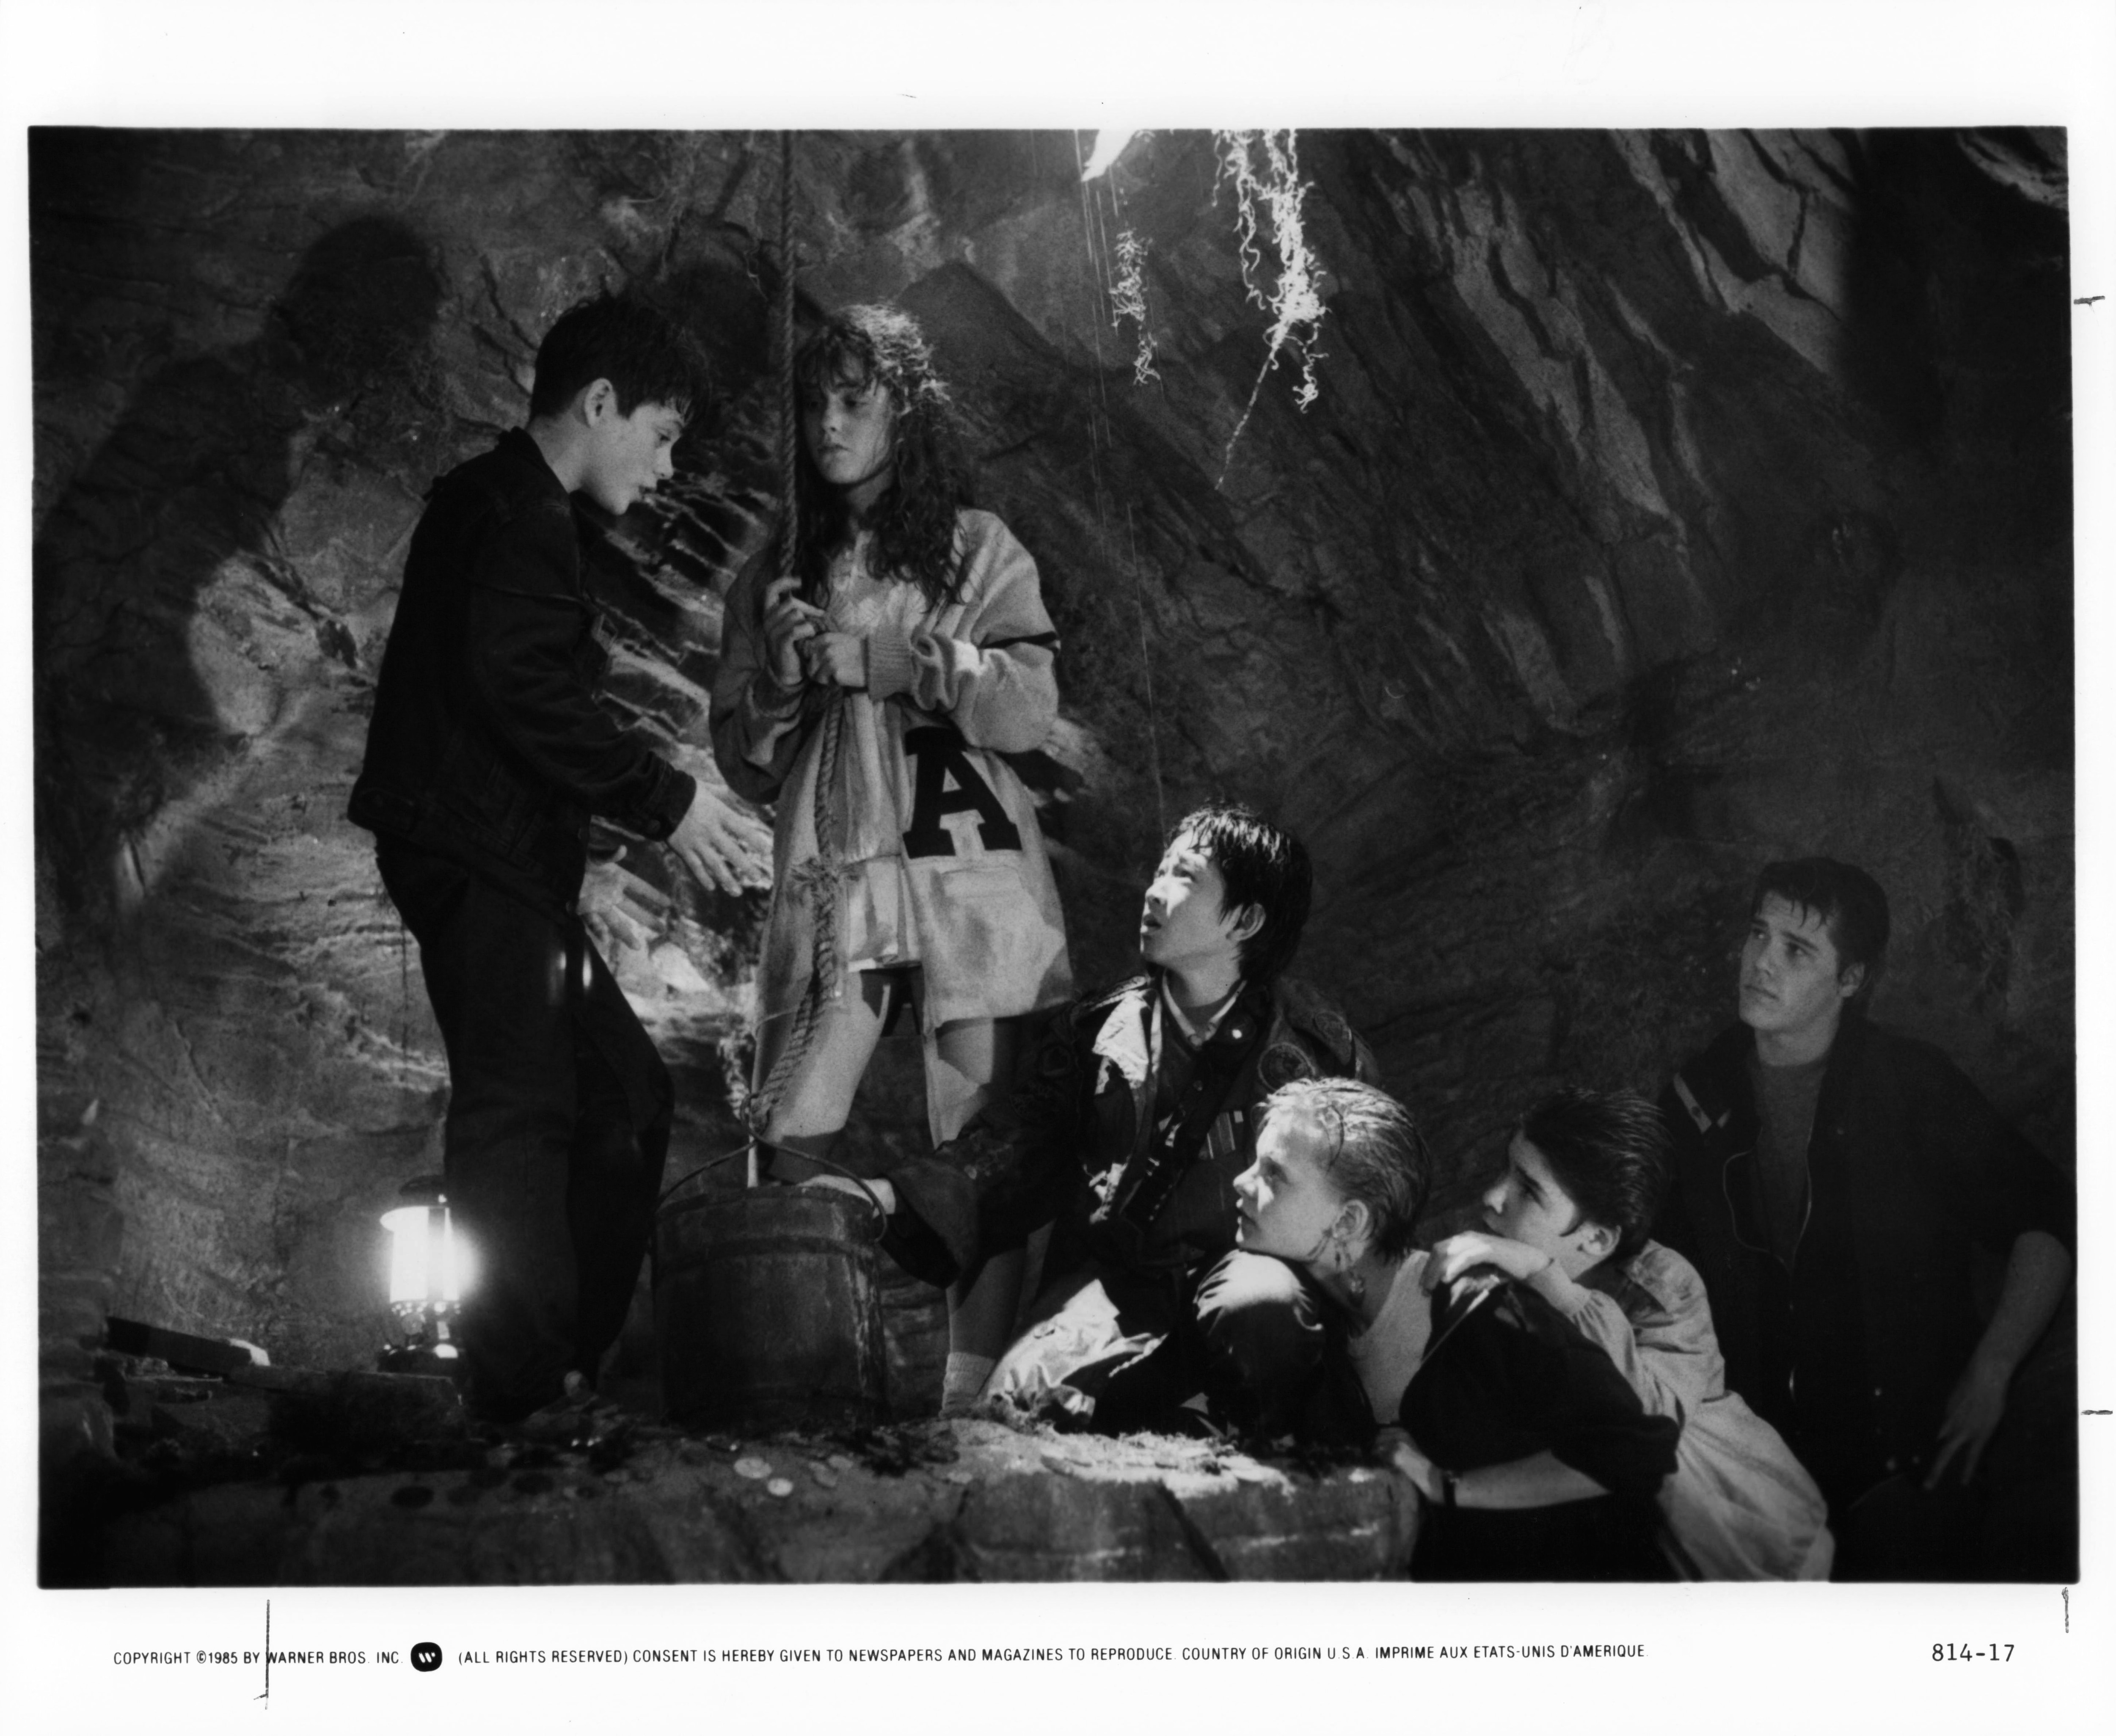 Black and white still image from The Goonies